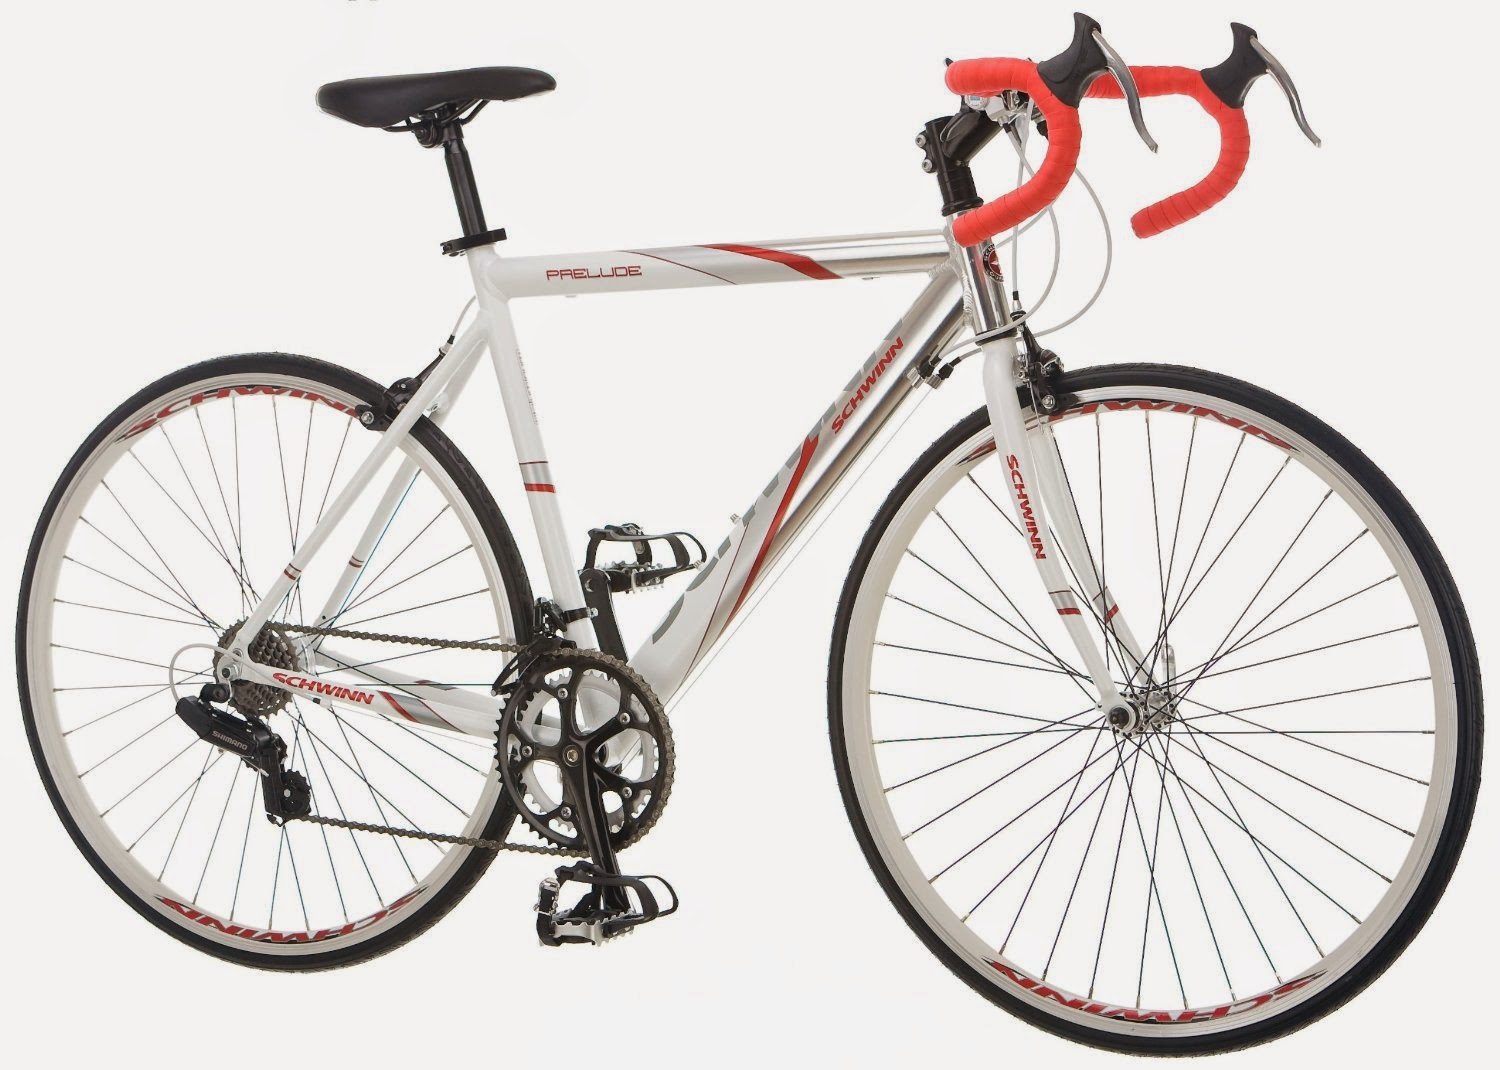 Schwinn Men's Prelude Road Bike Bicycle, review, ideal bike for commuting, leisure and fitness cycling